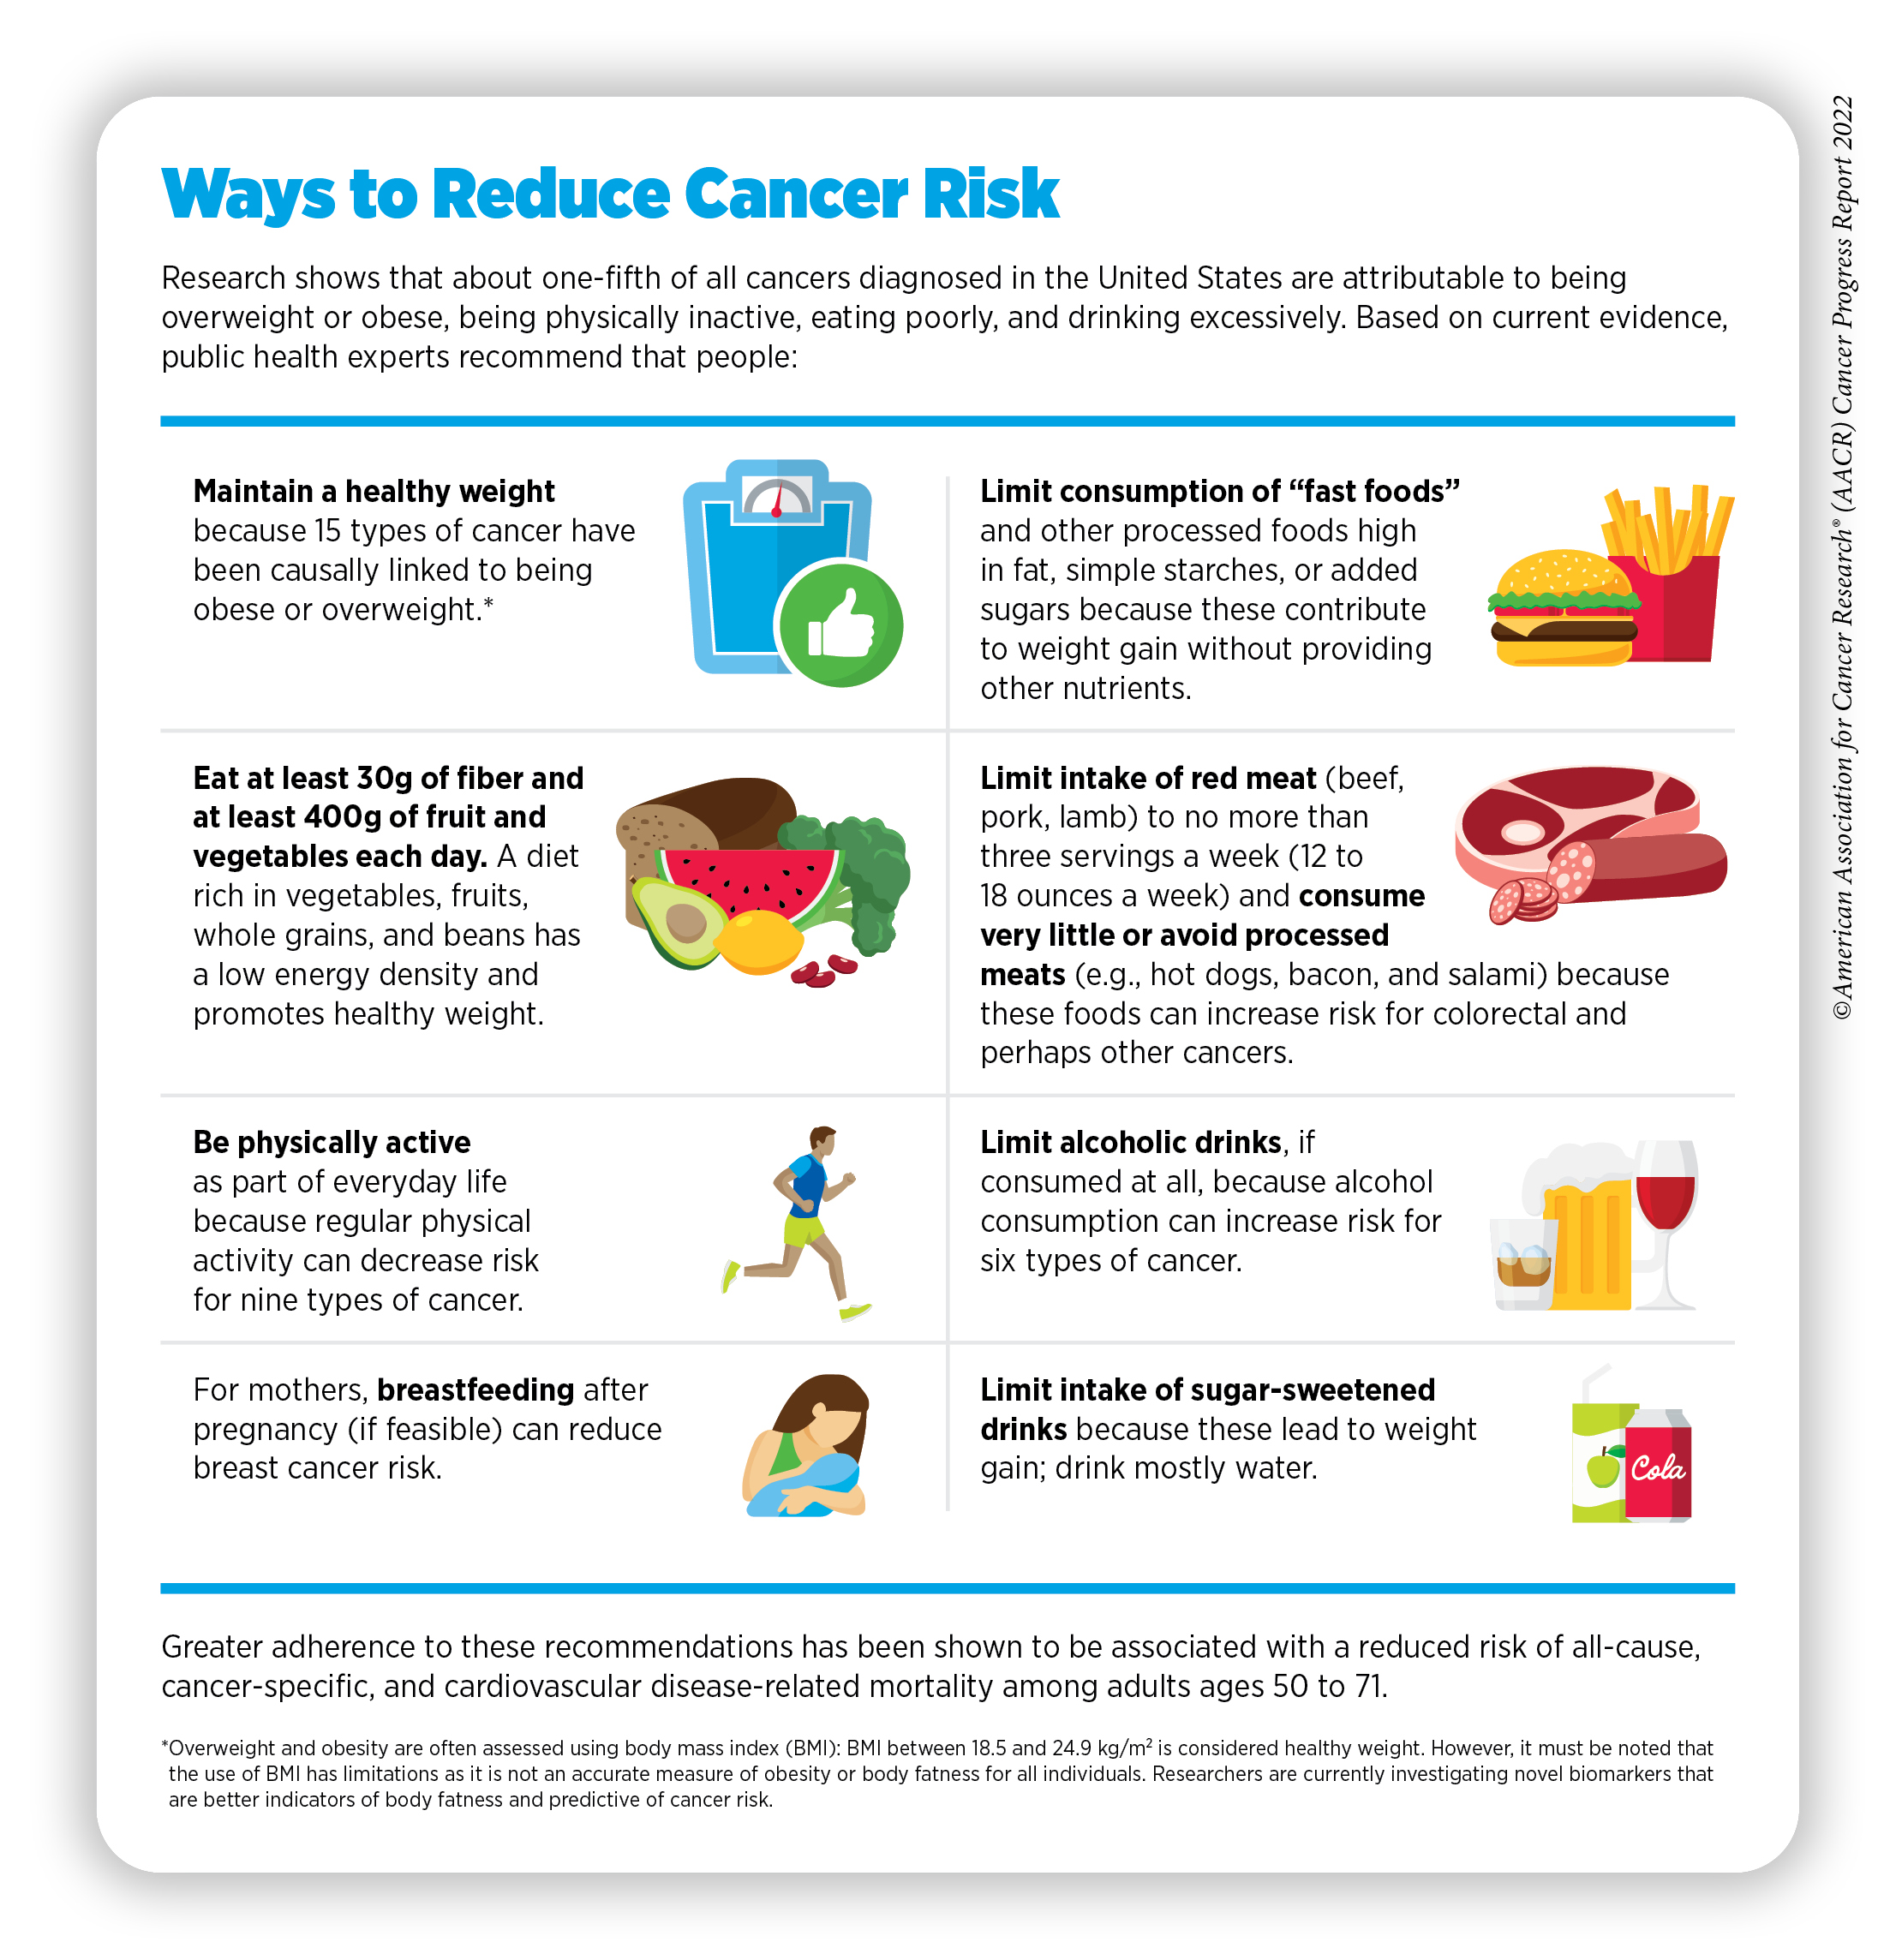 Strategies to lower cancer risk